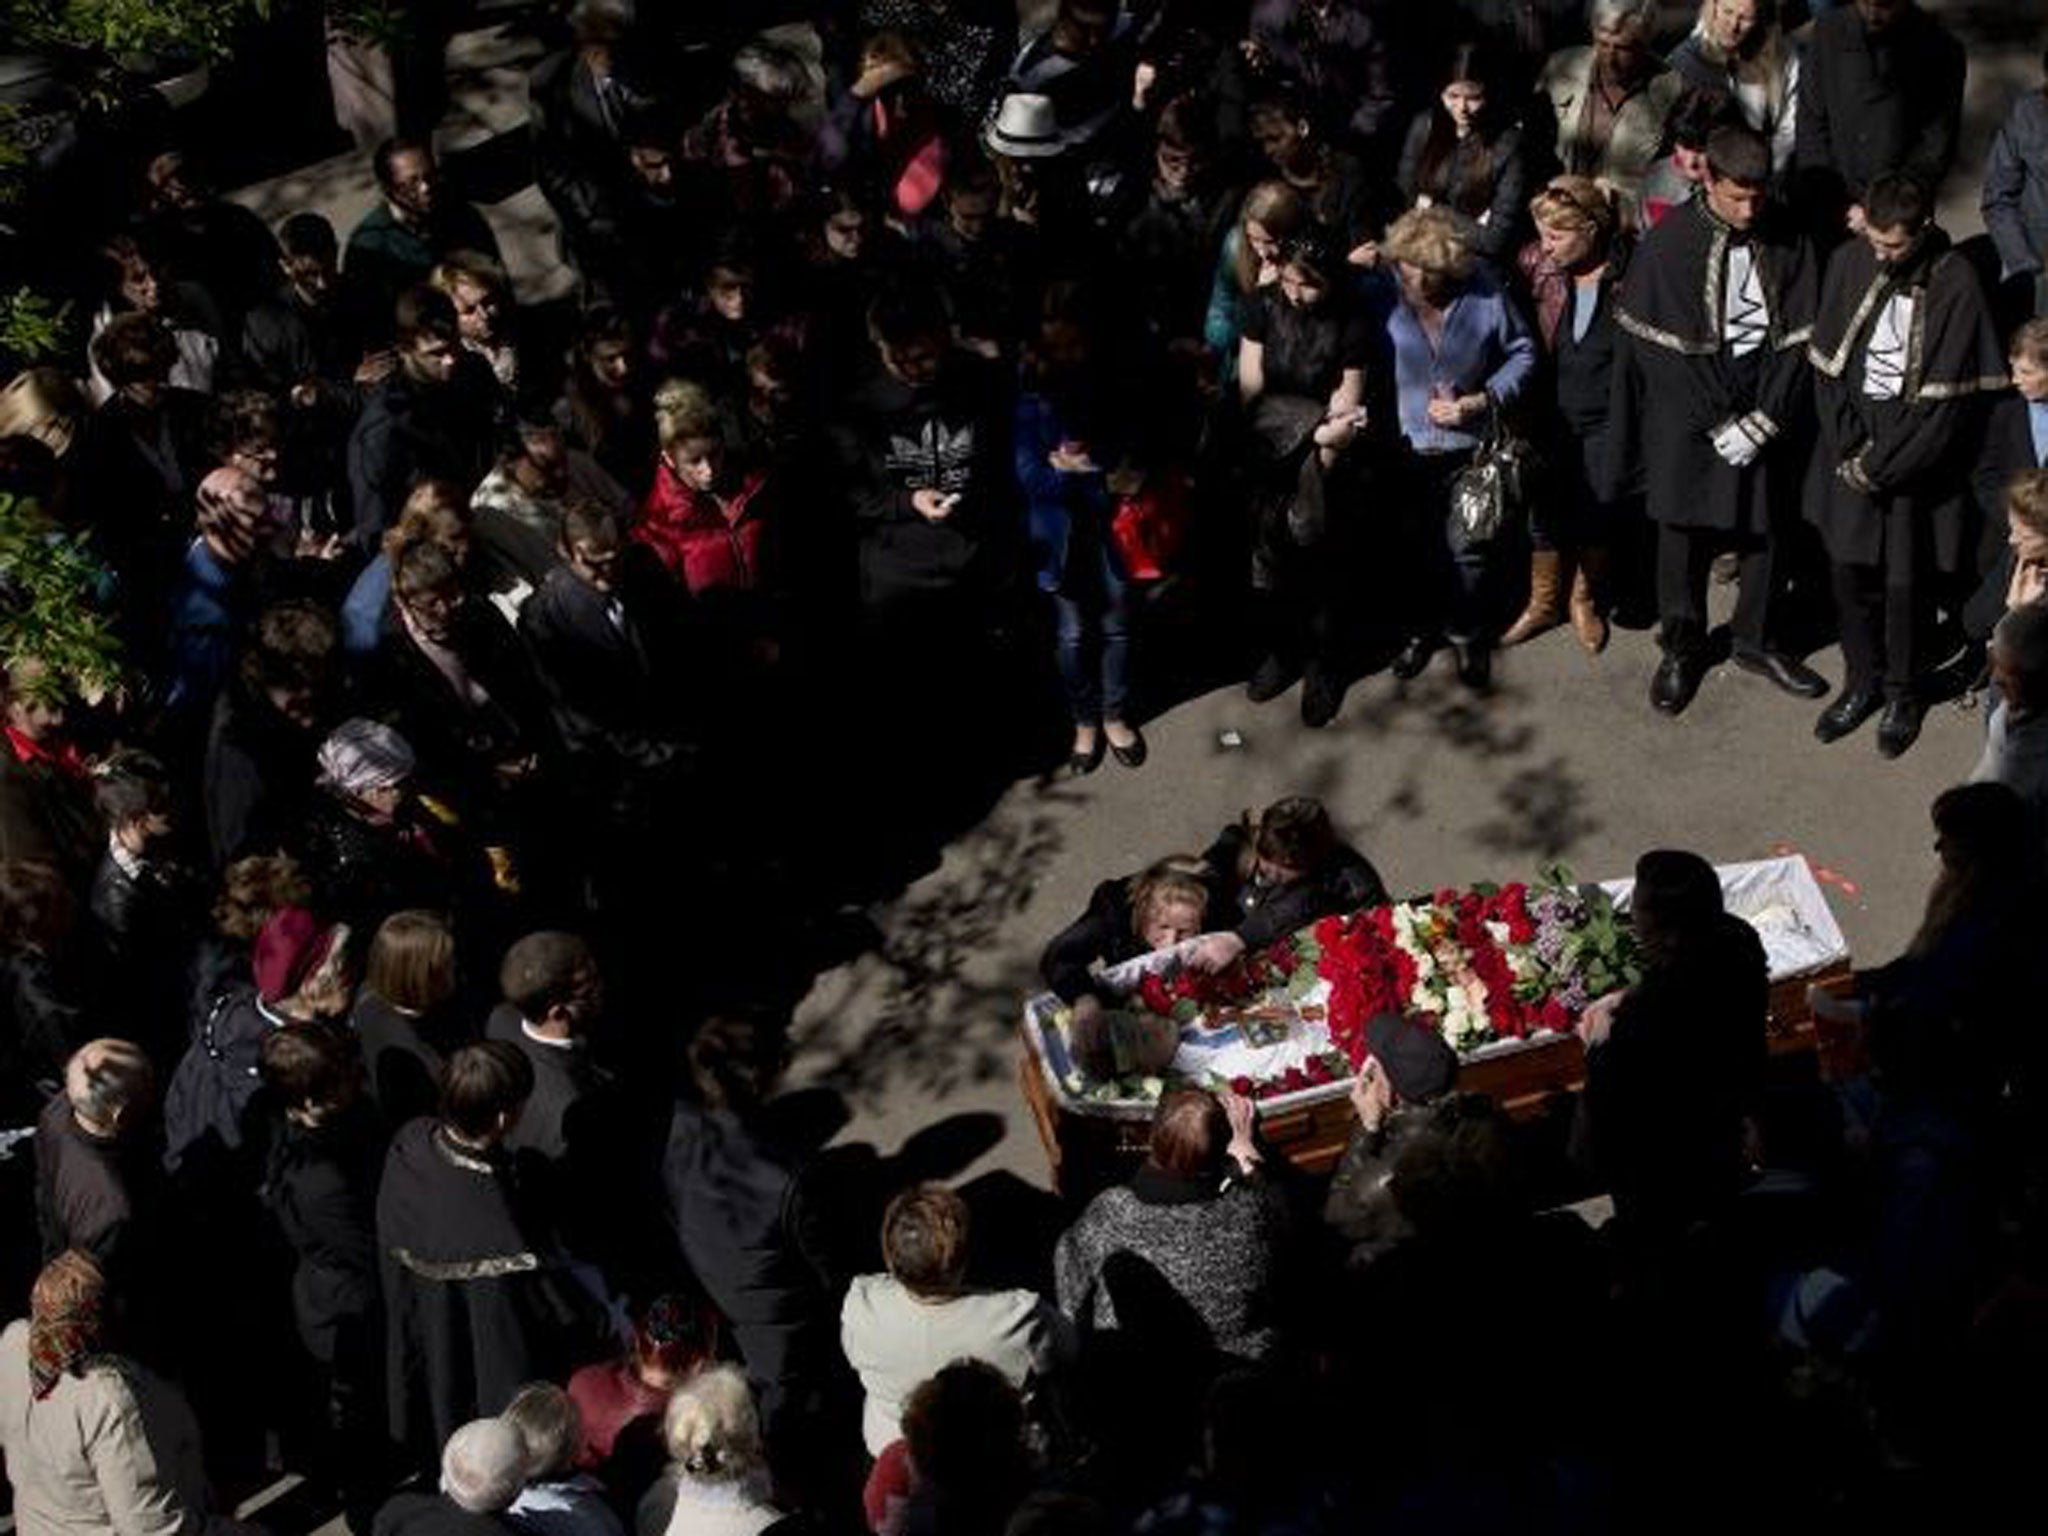 People gather around the coffin of 17 year-old Vadim Papura during a religious service outside the apartment block he lived in, in Odessa, Ukraine, Tuesday, May 6, 2014.